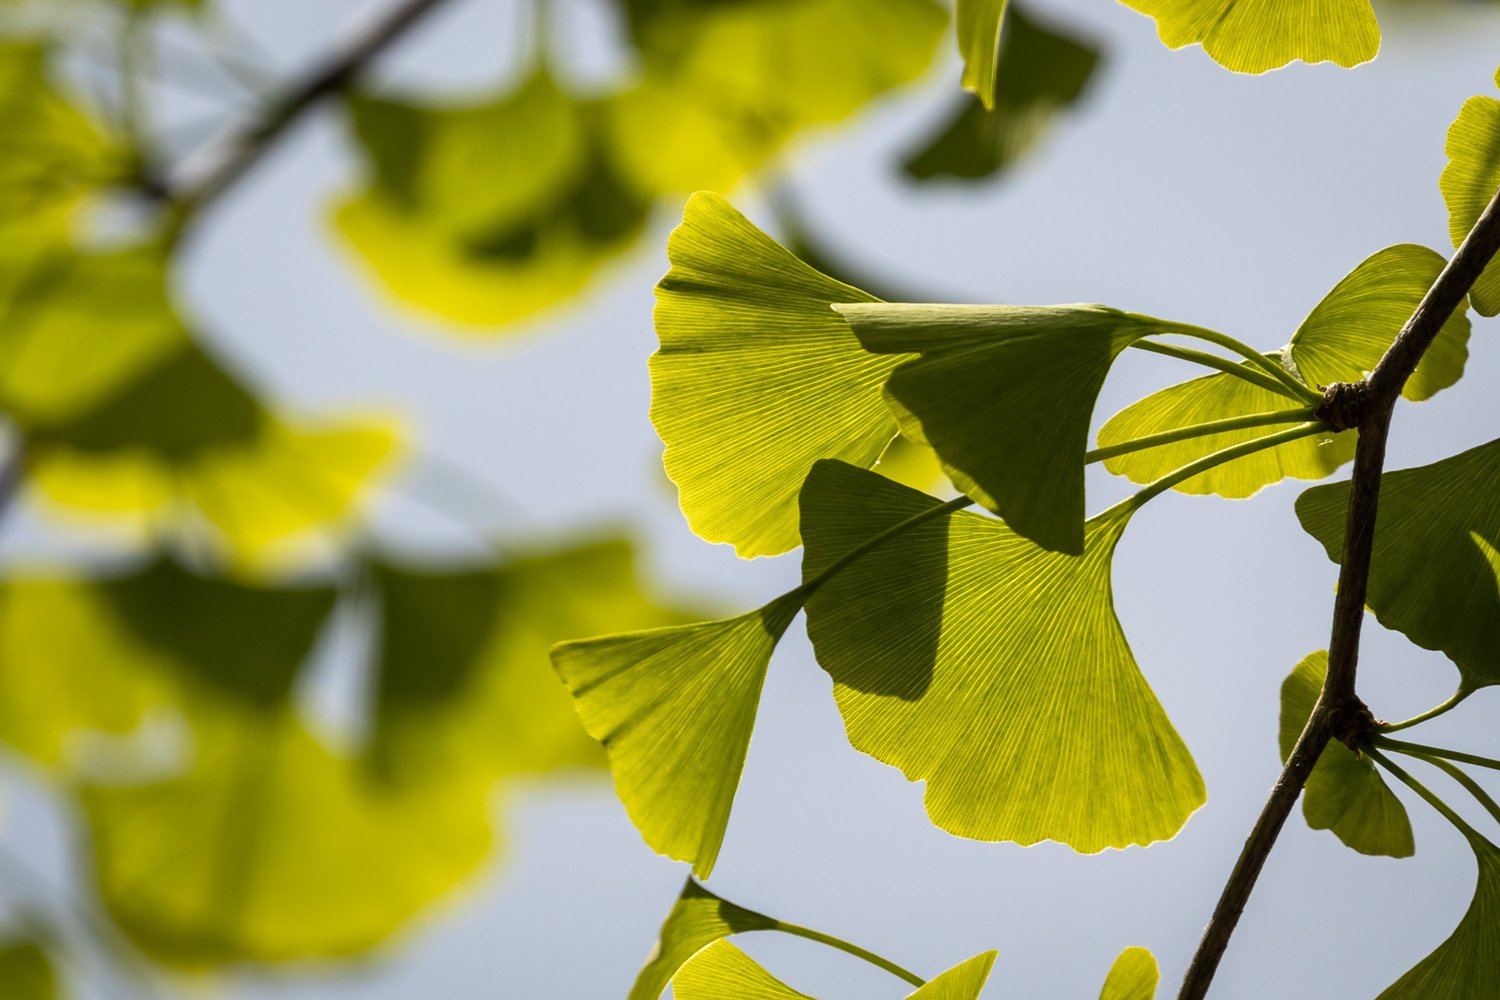 Image of Farm-to-product ginkgo biloba extracts offering full traceability and supply chain control.